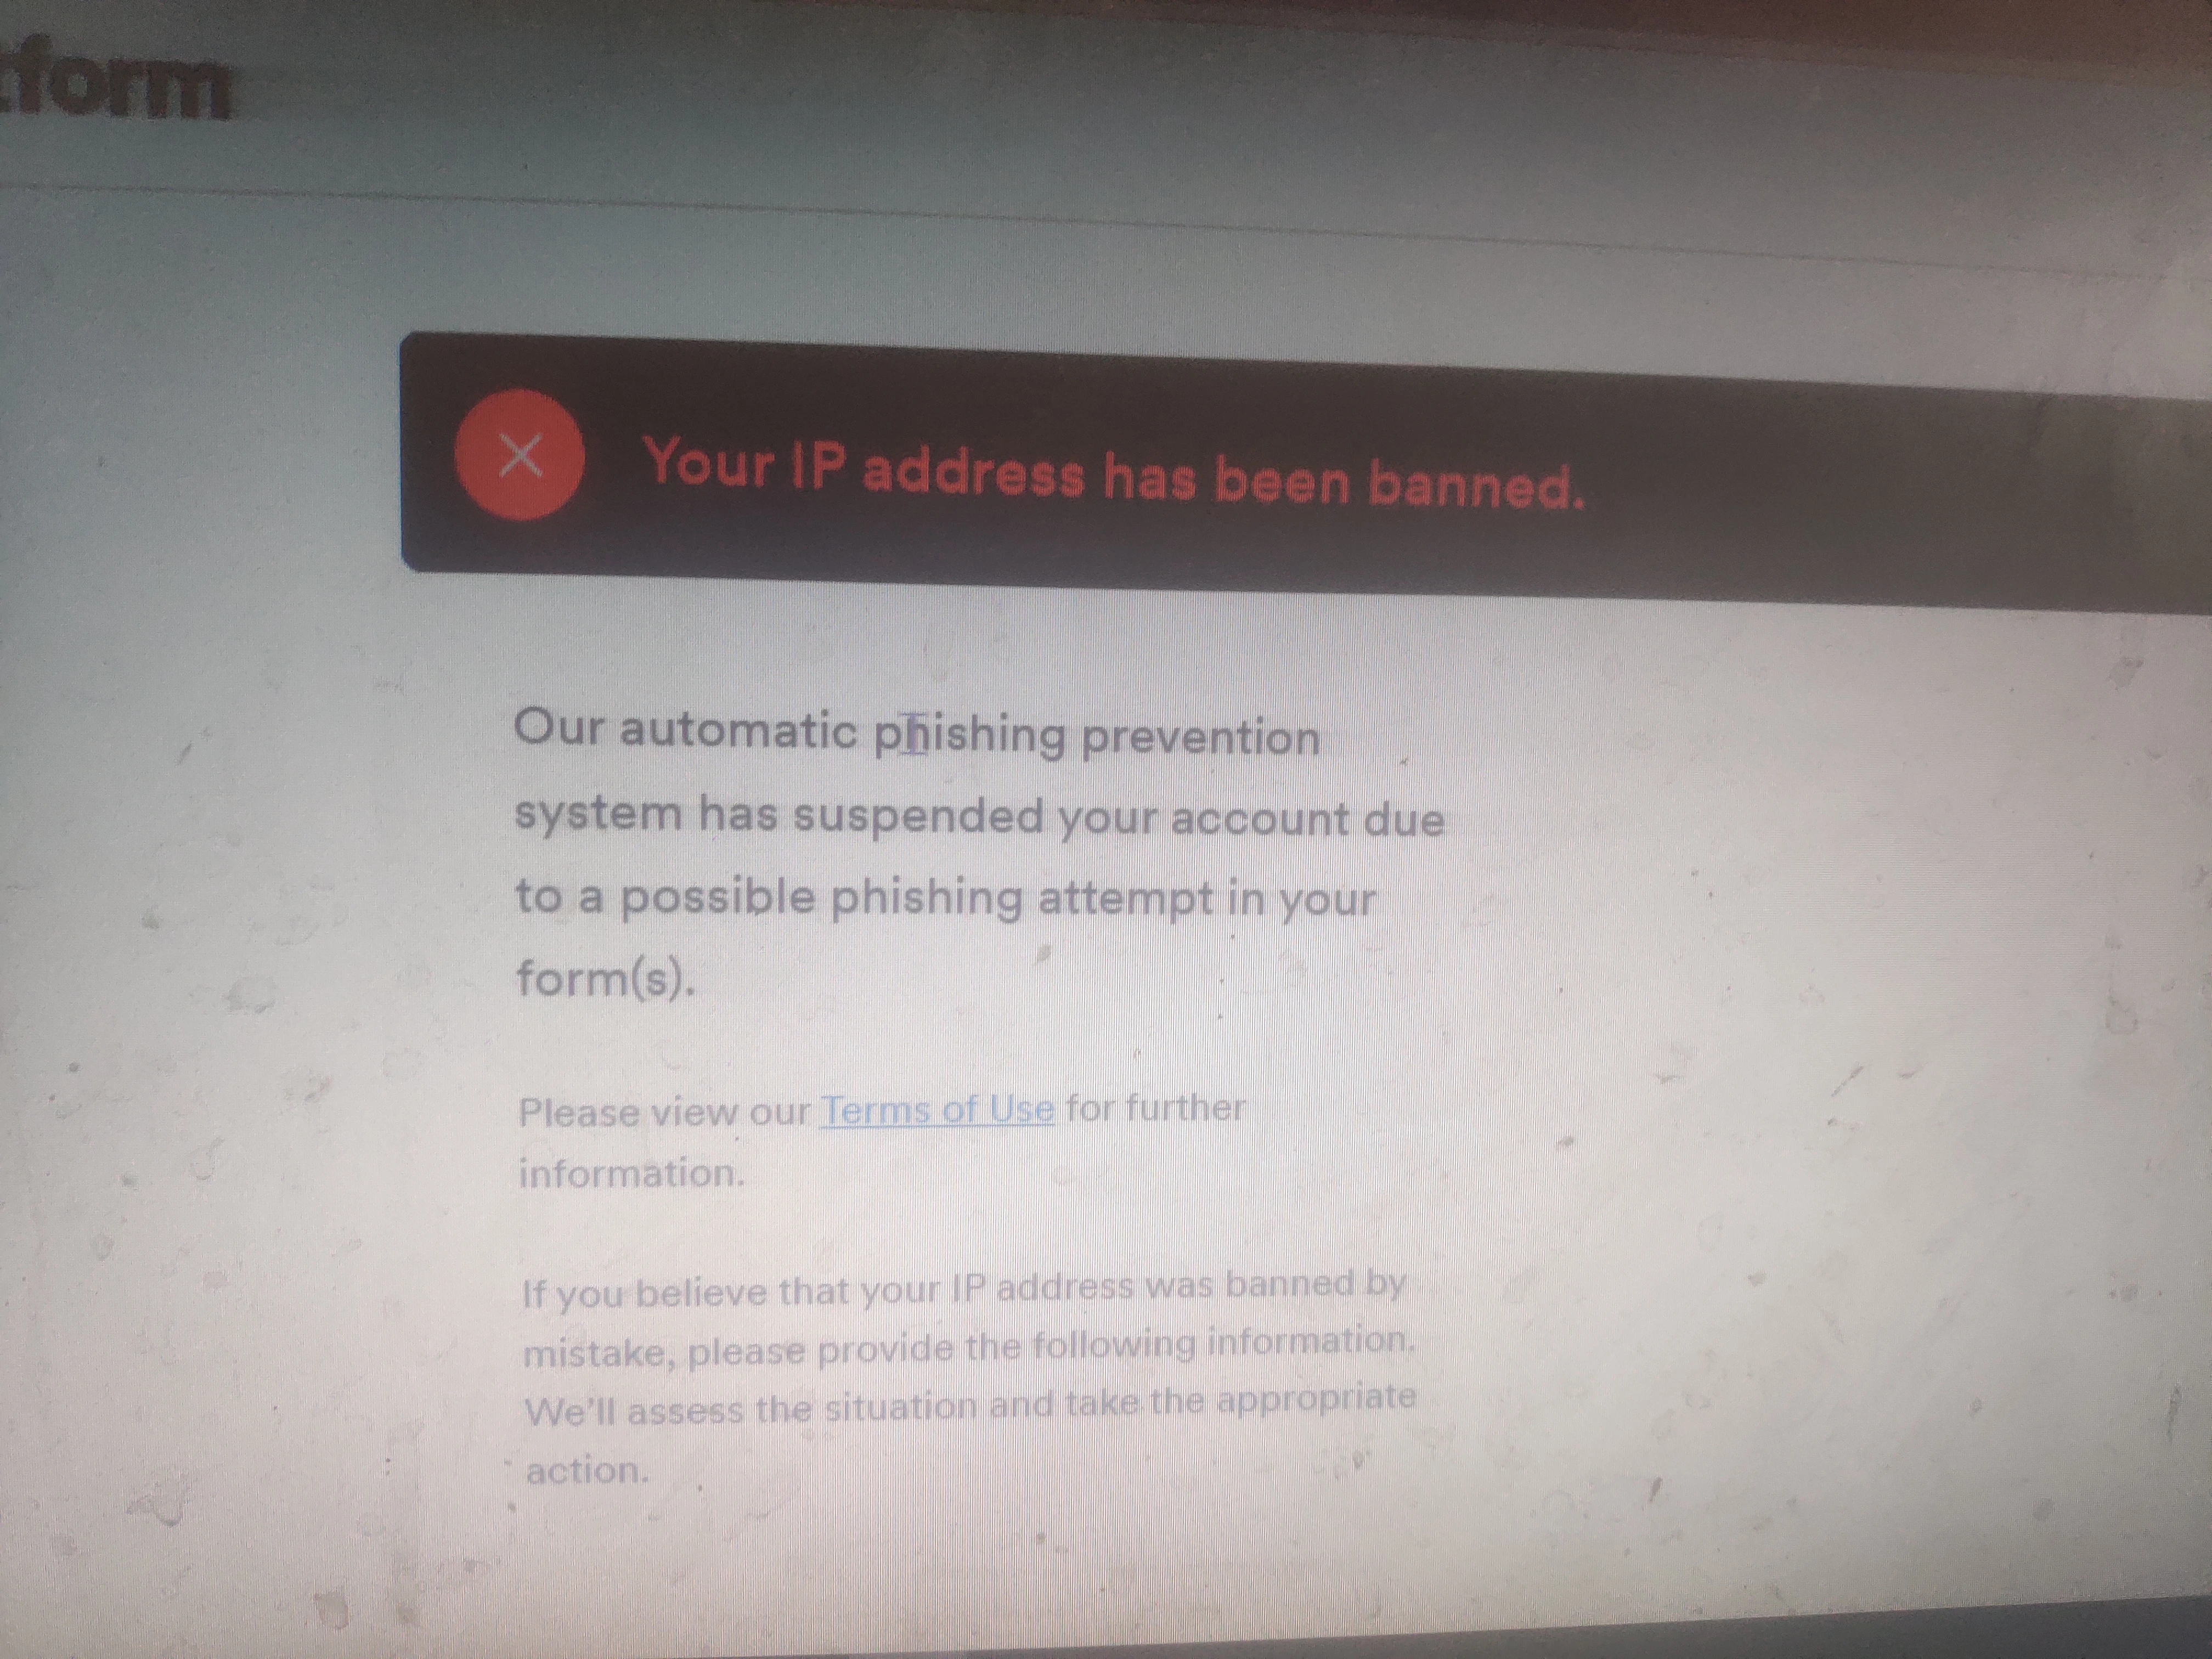 Account suspended: My IP address has been banned Screenshot 20